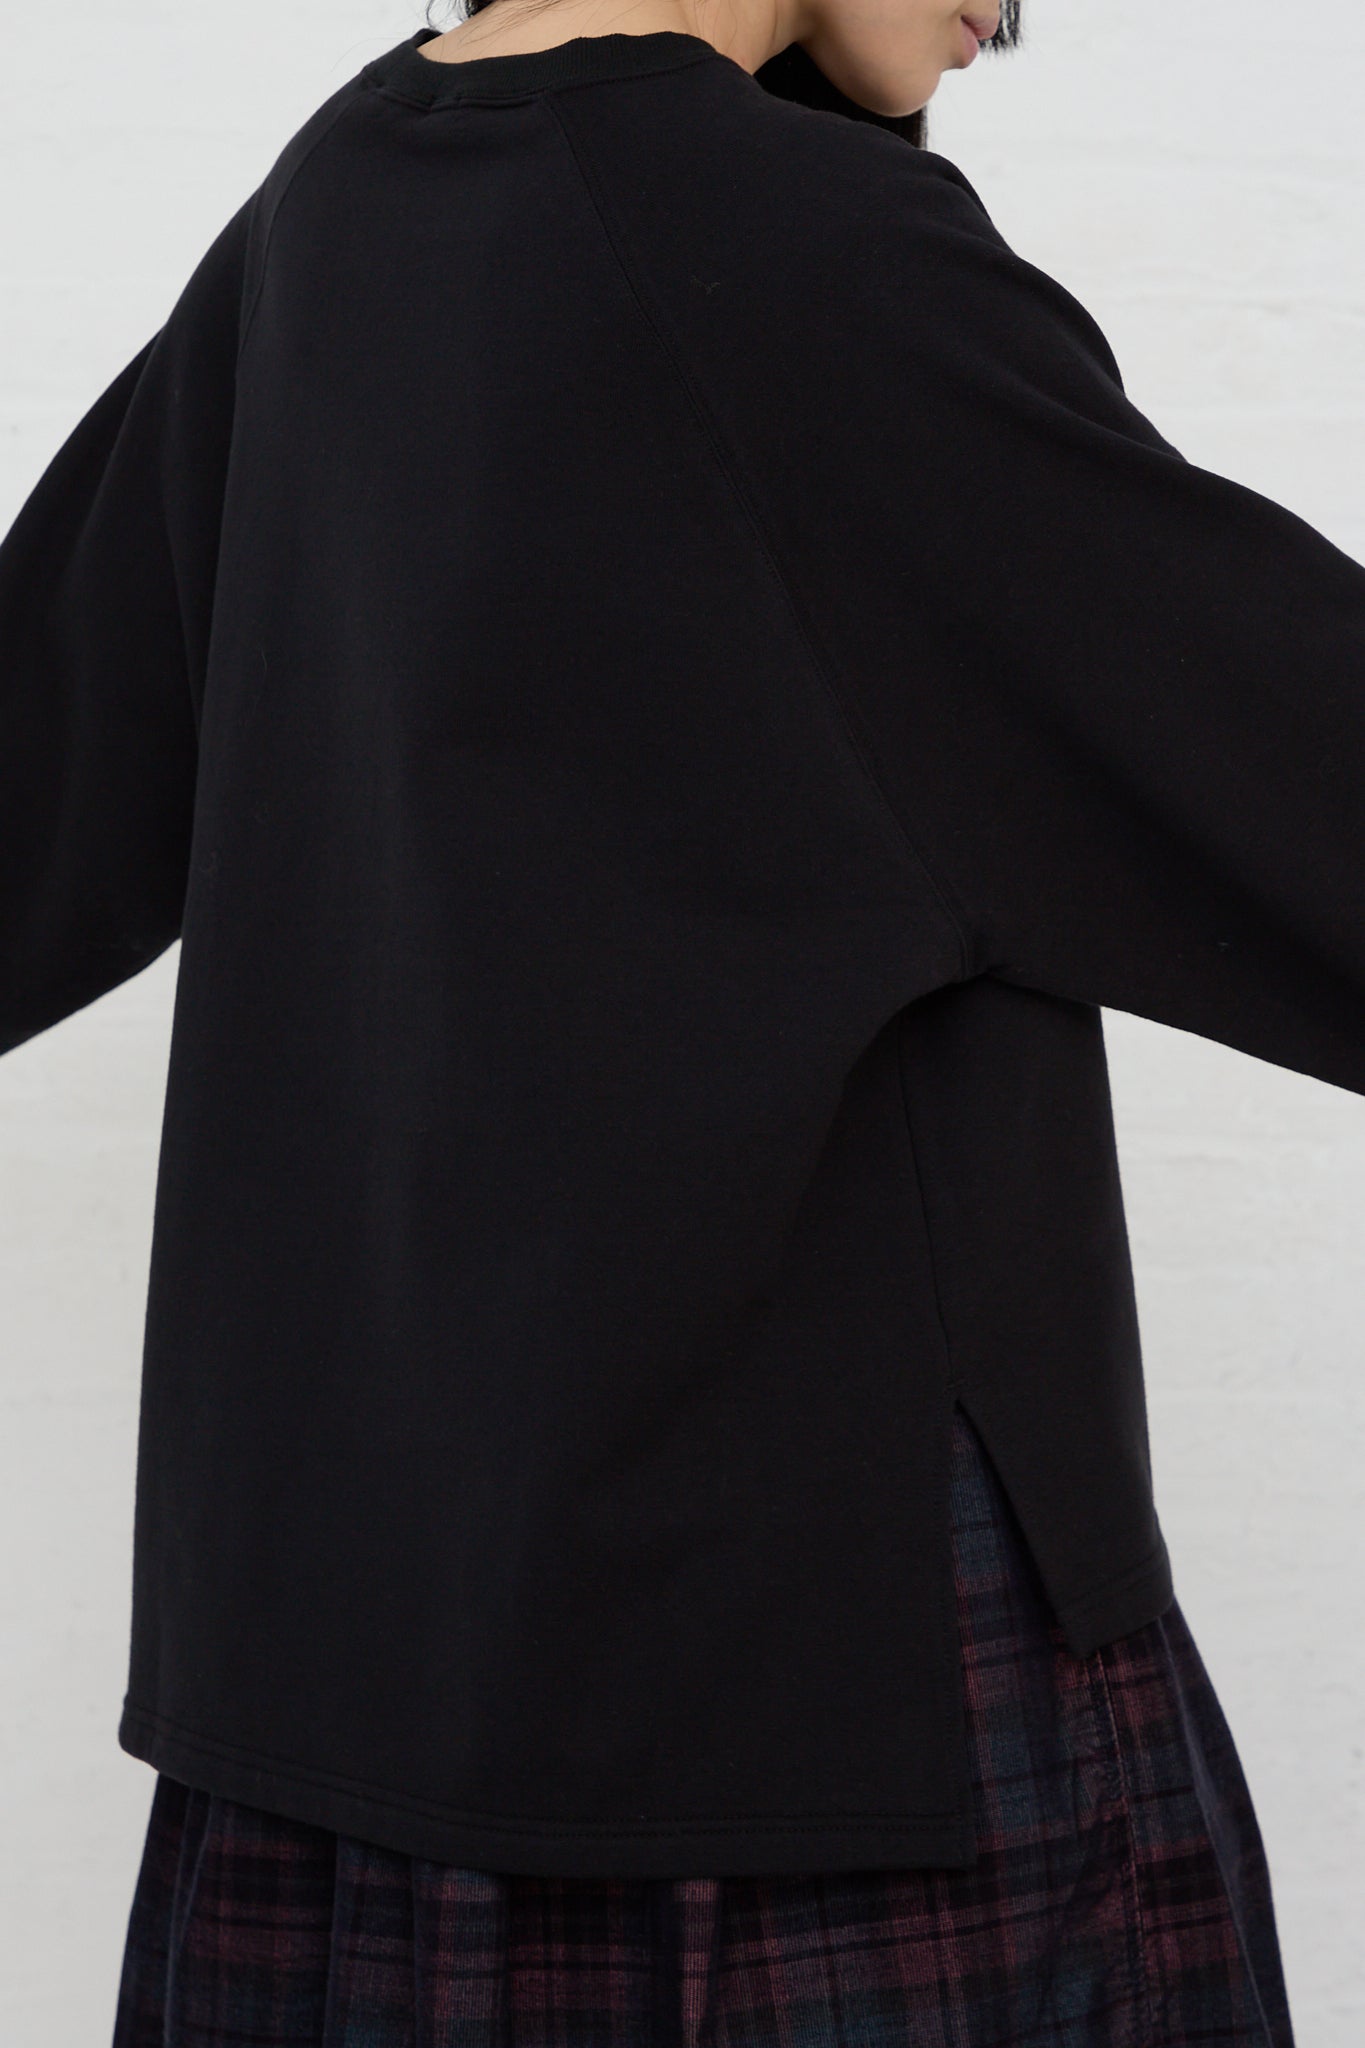 The back of a woman wearing an Ichi black relaxed fit long sleeve Cotton Knit Pullover and plaid skirt.